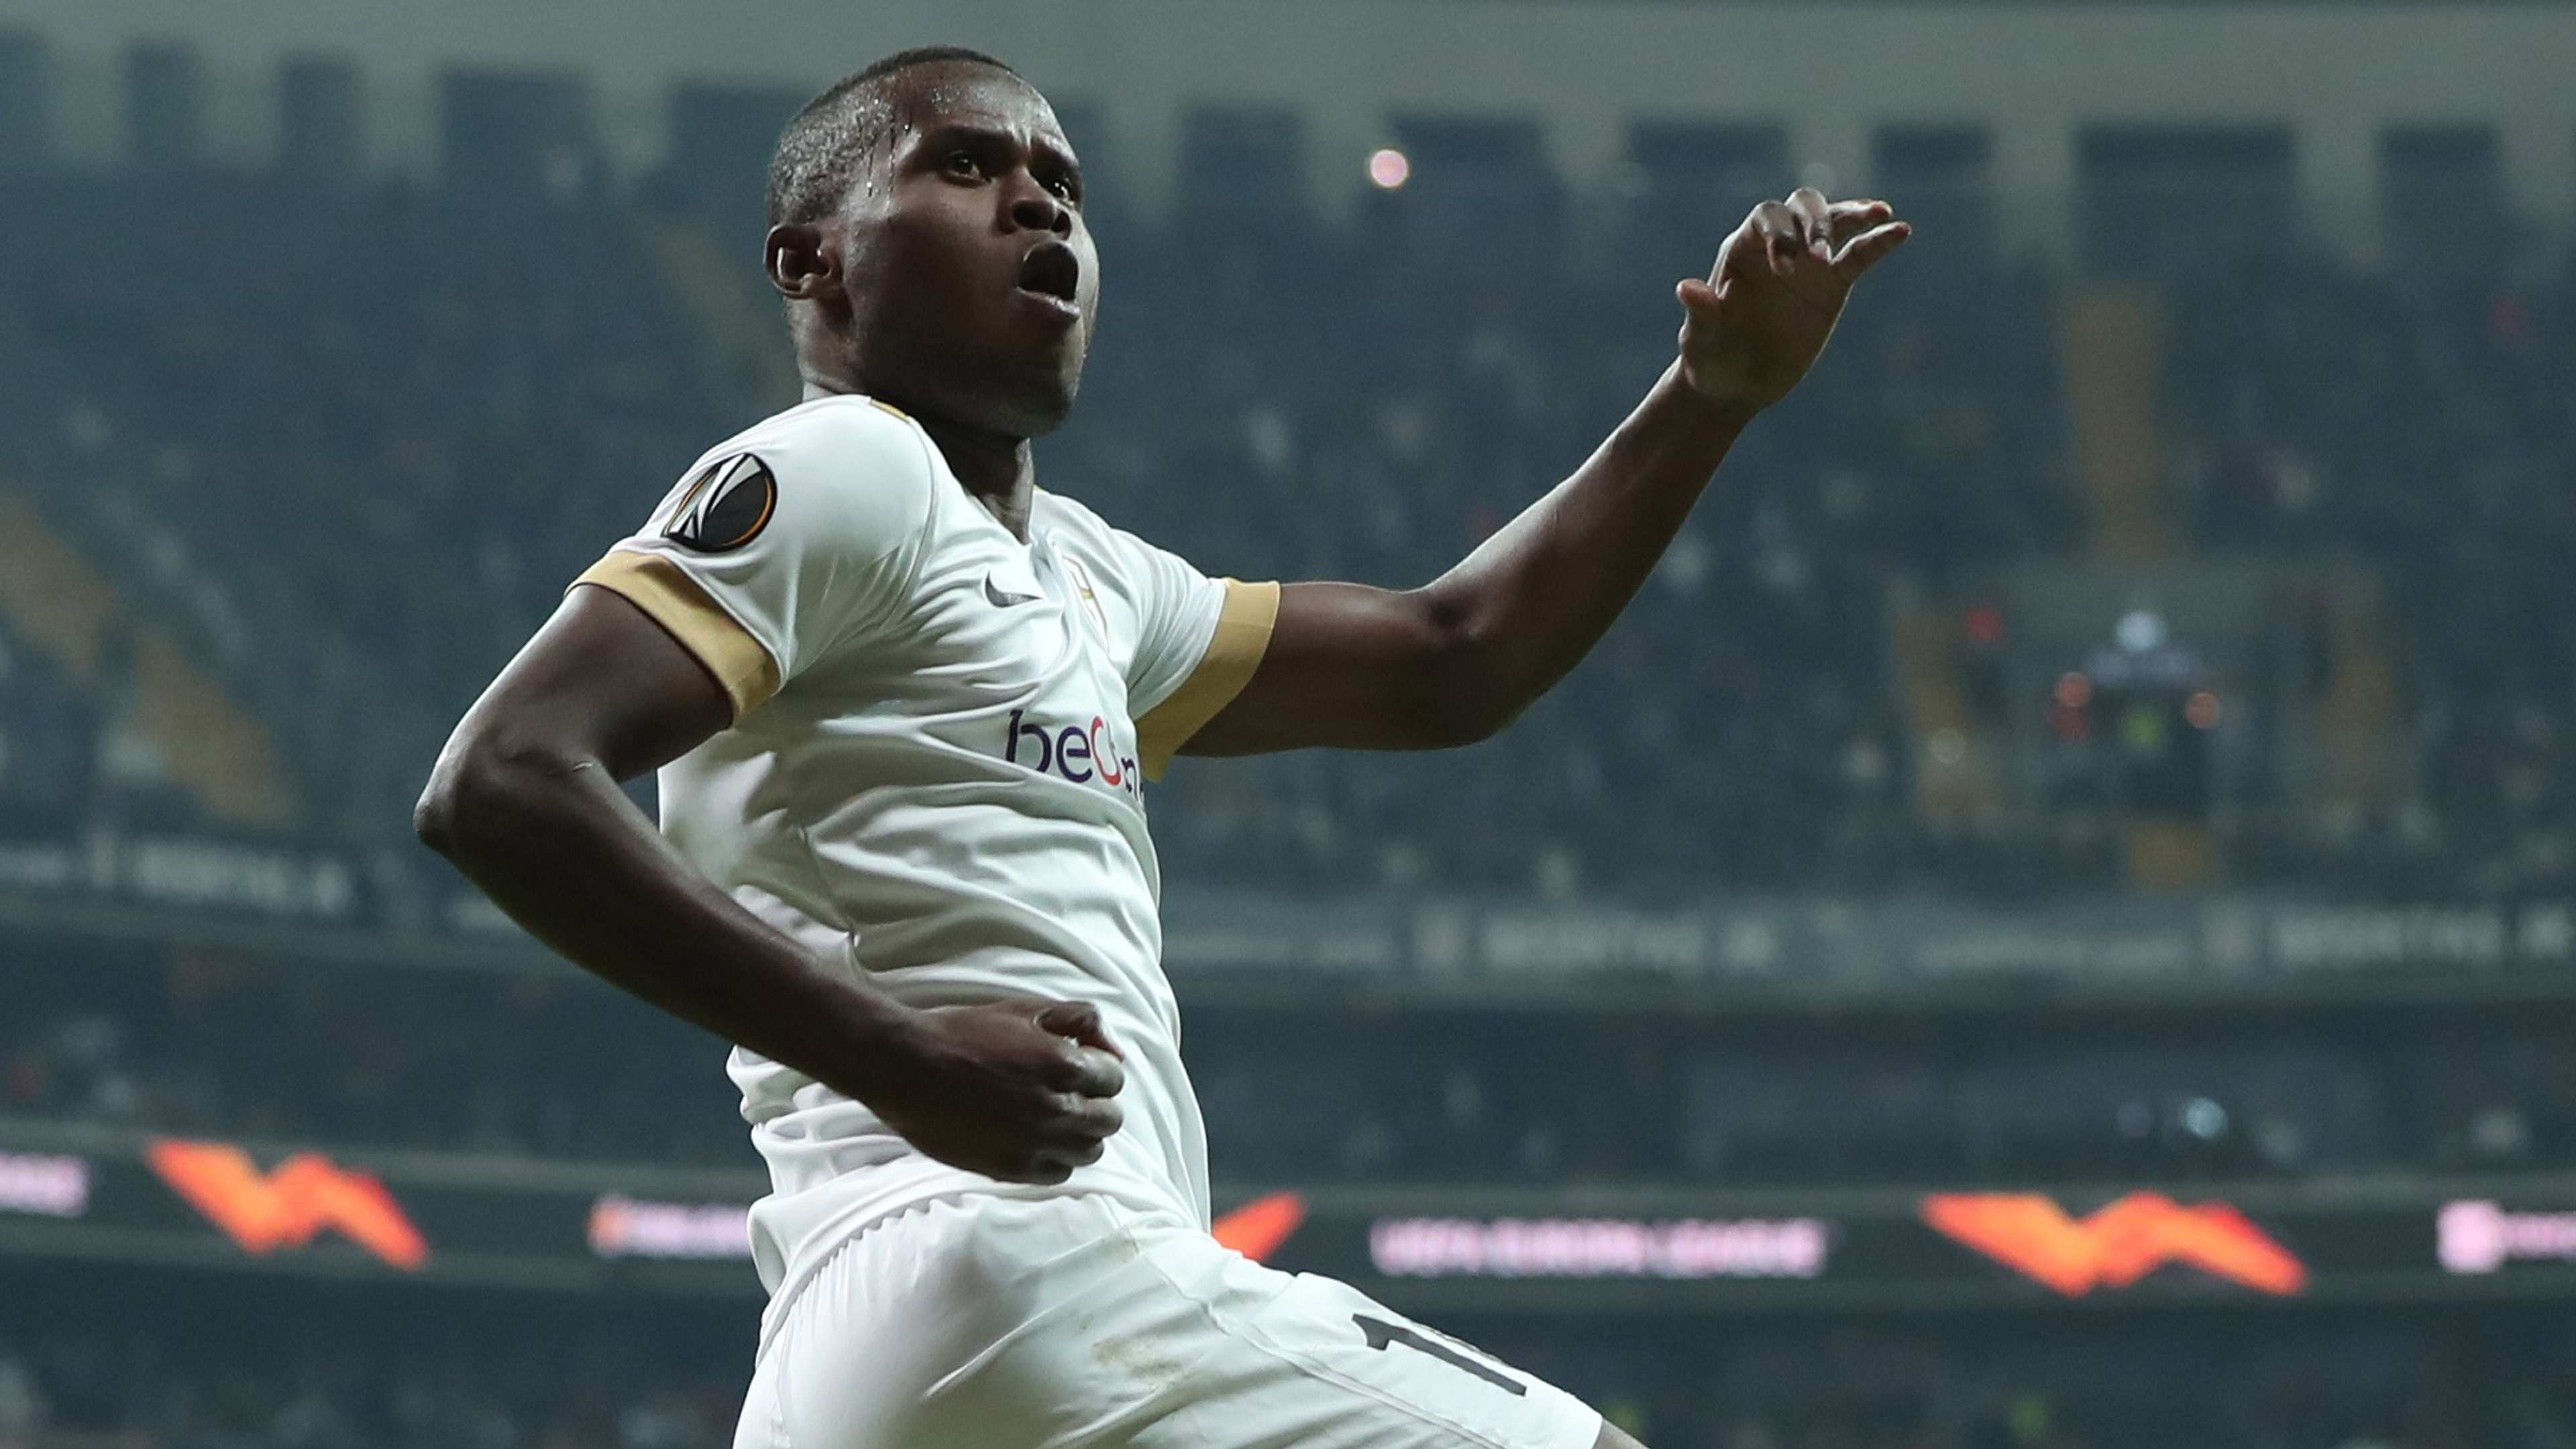 Genk's Mbwana Samatta celebrates after scoring the 1-0 lead during the UEFA Europa Legue group I soccer match between Besiktas and Genk in Istanbul, Turkey, 25 October 2018